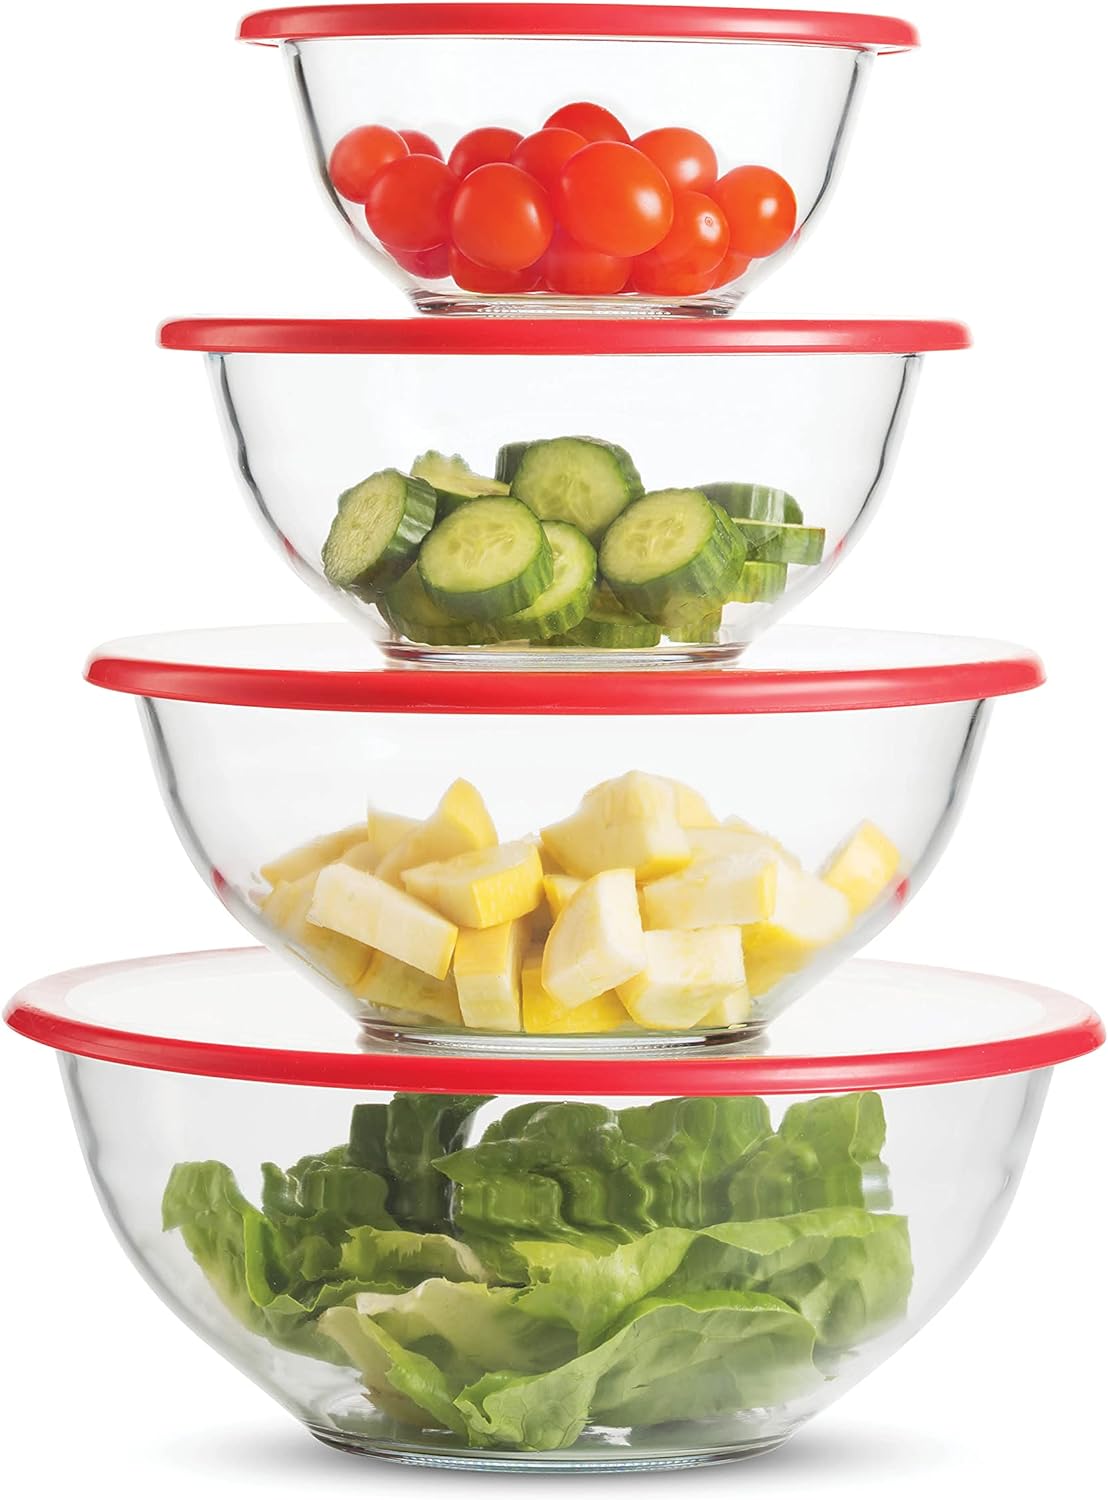 Superior Glass Mixing Bowls Set with Lids - 8-Piece with BPA-Free lids, Space-Saving Nesting Bowls - Easy Grip & Stable Design for Meal Prep & Food Storage - For Cooking, Baking